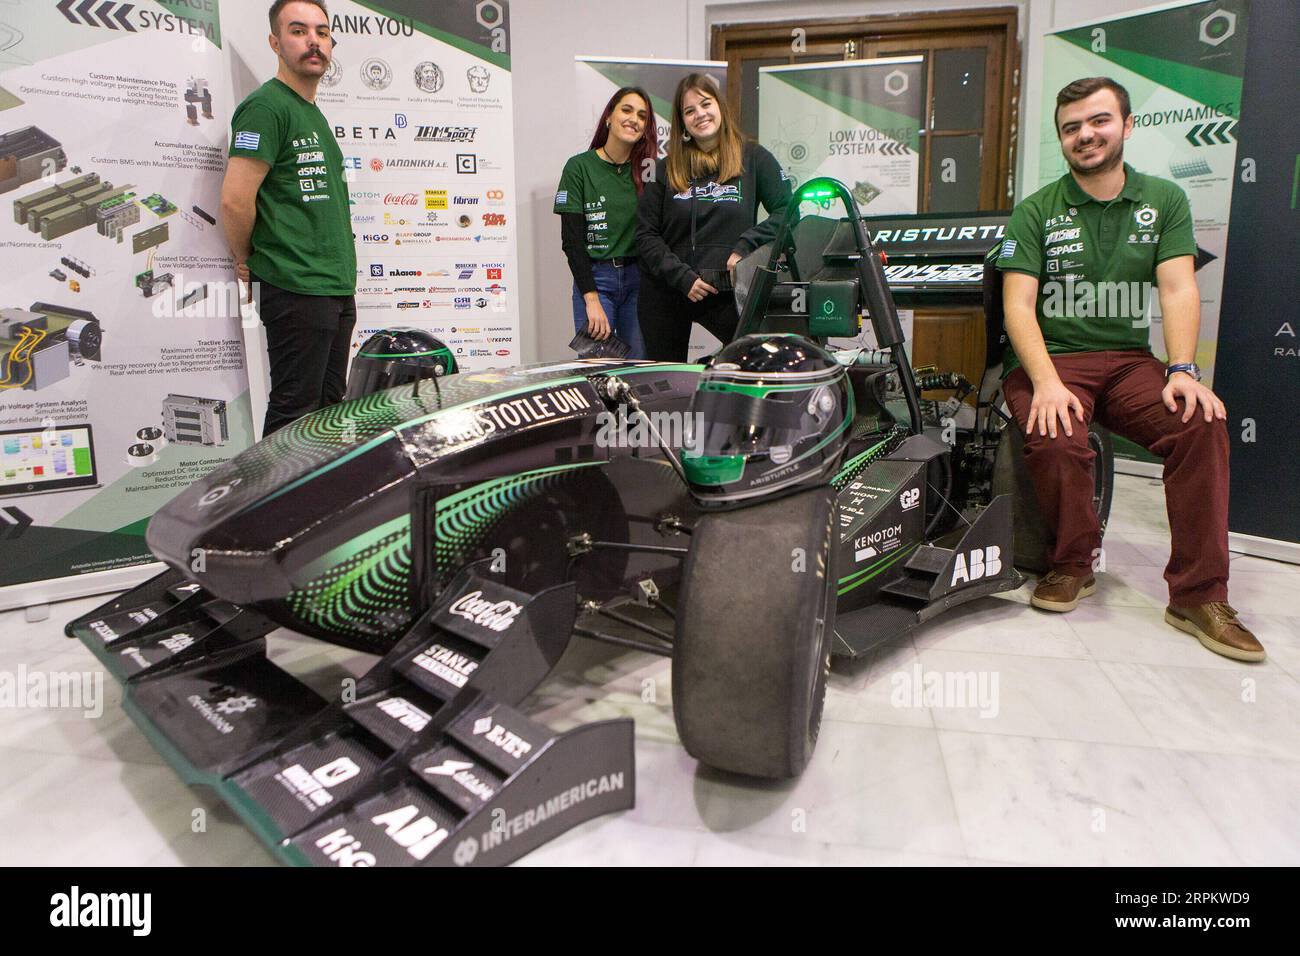 200118 -- ATHENS, Jan. 18, 2020 -- Students of Aristotle University of Thessaloniki pose for photos with their electric race car during the Eco-Fest 2020 event in Athens, Greece, on Jan. 18, 2020. The three-day Eco-Fest 2020 was opened here on Saturday, aiming to introduce innovative products, new technologies and cutting-edge services in electric, energy and recycling sectors.  GREECE-ATHENS-ECO-FEST 2020 MariosxLolos PUBLICATIONxNOTxINxCHN Stock Photo